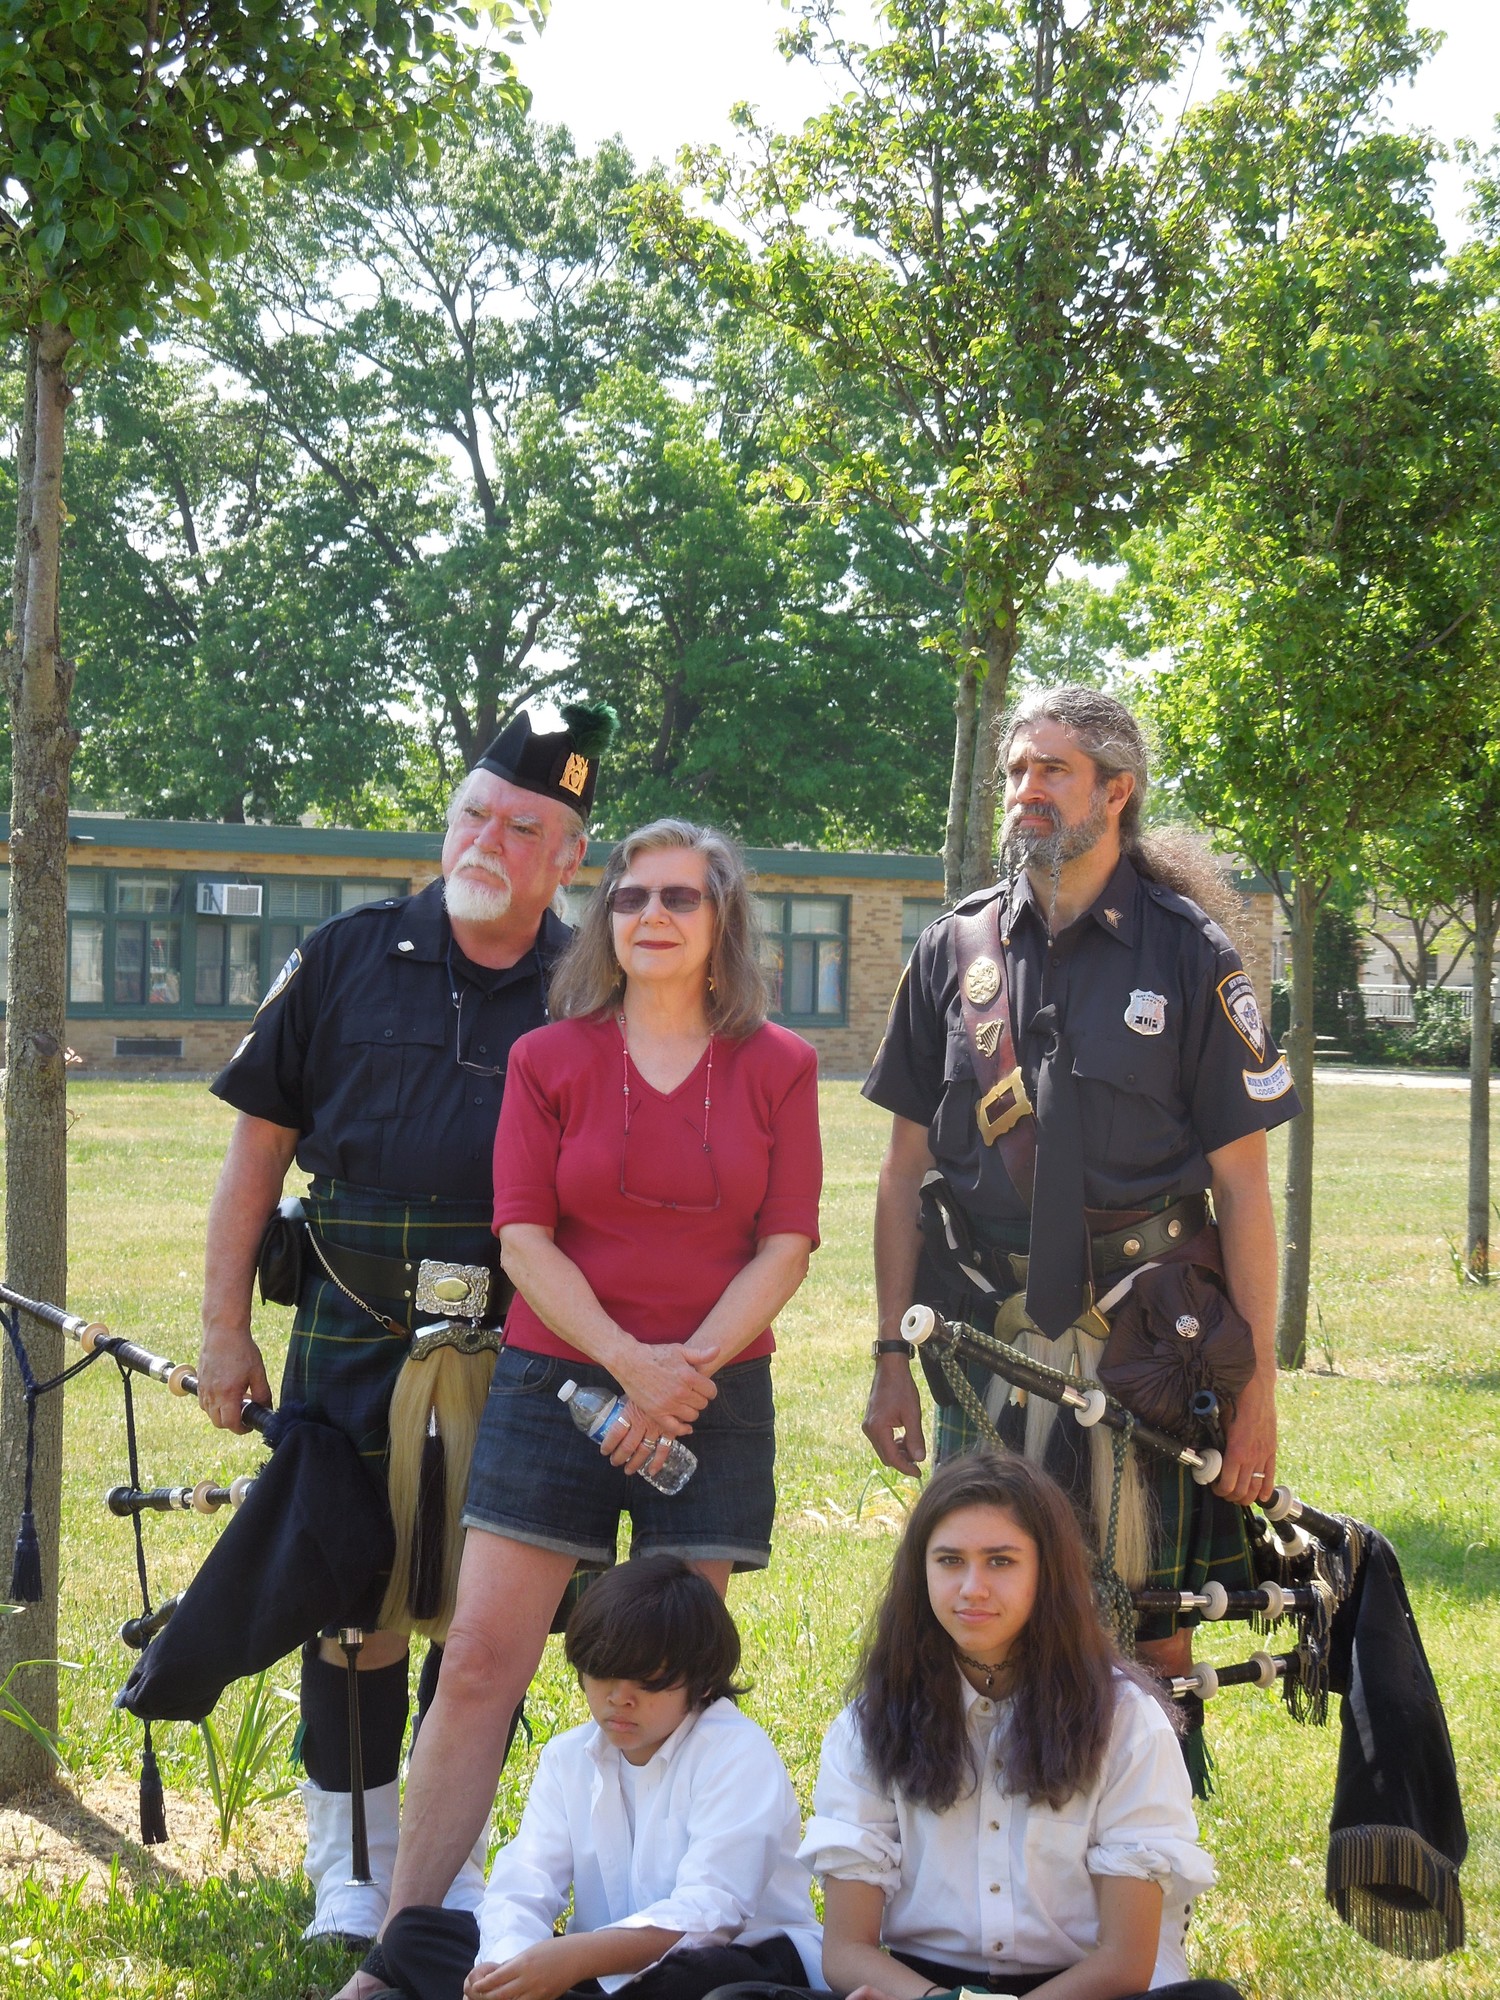 William Sneddon, Margaret Sneddon and Jerry Dixon, standing, along with Peter Ceron and Chloe Dixon. William Sneddon and Jerry Dixon are members of the New York State Irish War Pipe Band and play with the Seaford Fire Department.